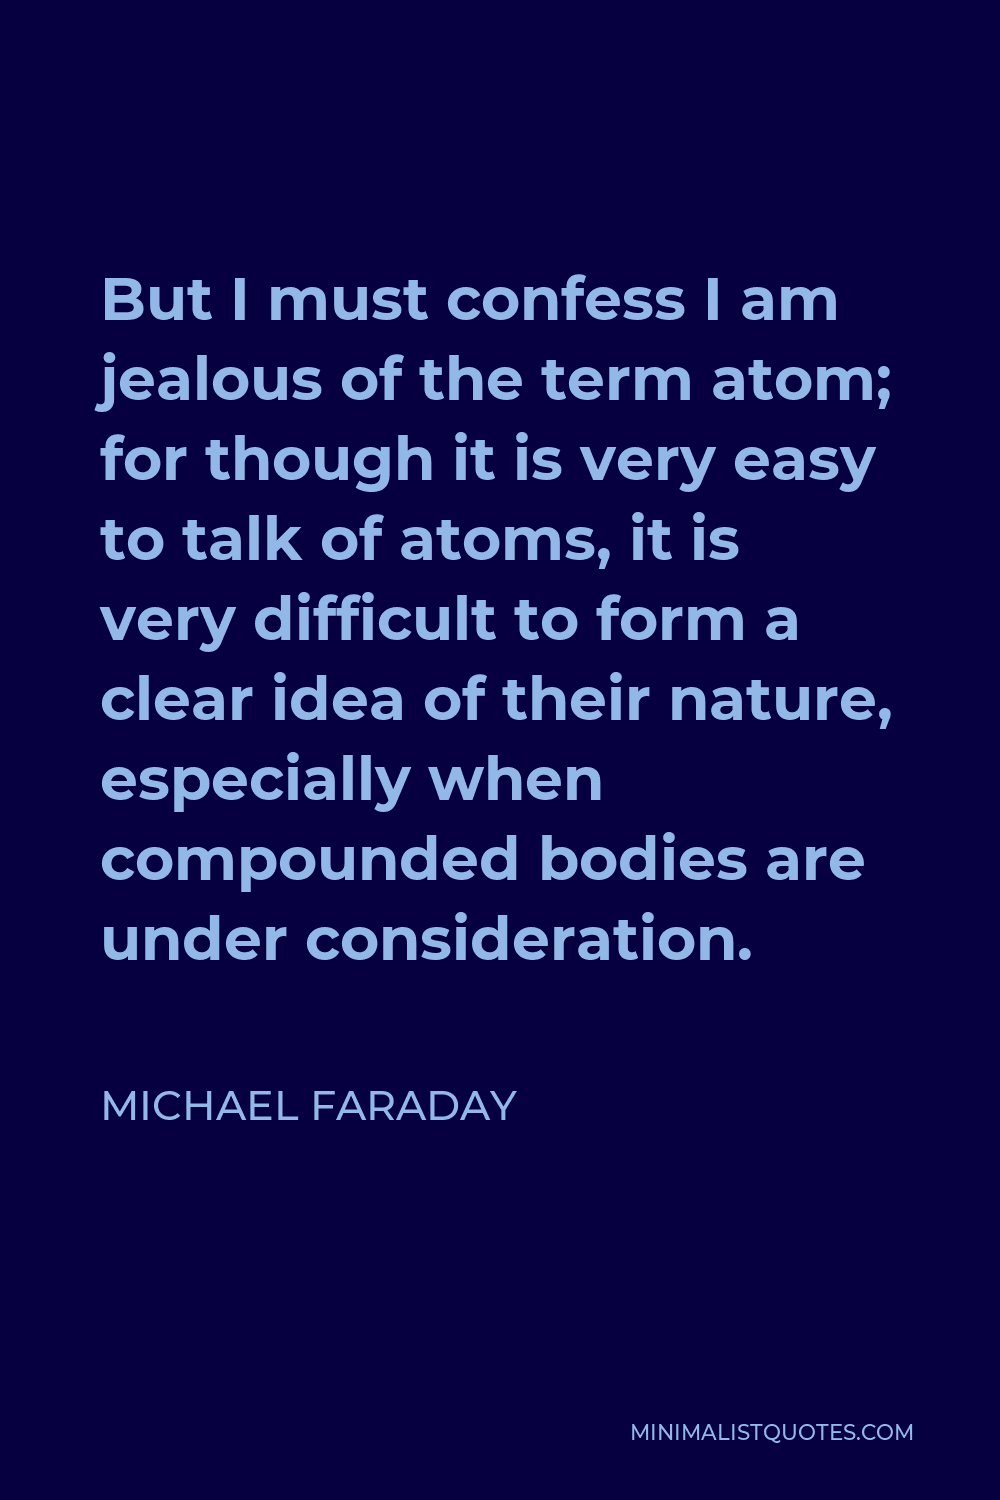 Michael Faraday Quote - But I must confess I am jealous of the term atom; for though it is very easy to talk of atoms, it is very difficult to form a clear idea of their nature, especially when compounded bodies are under consideration.